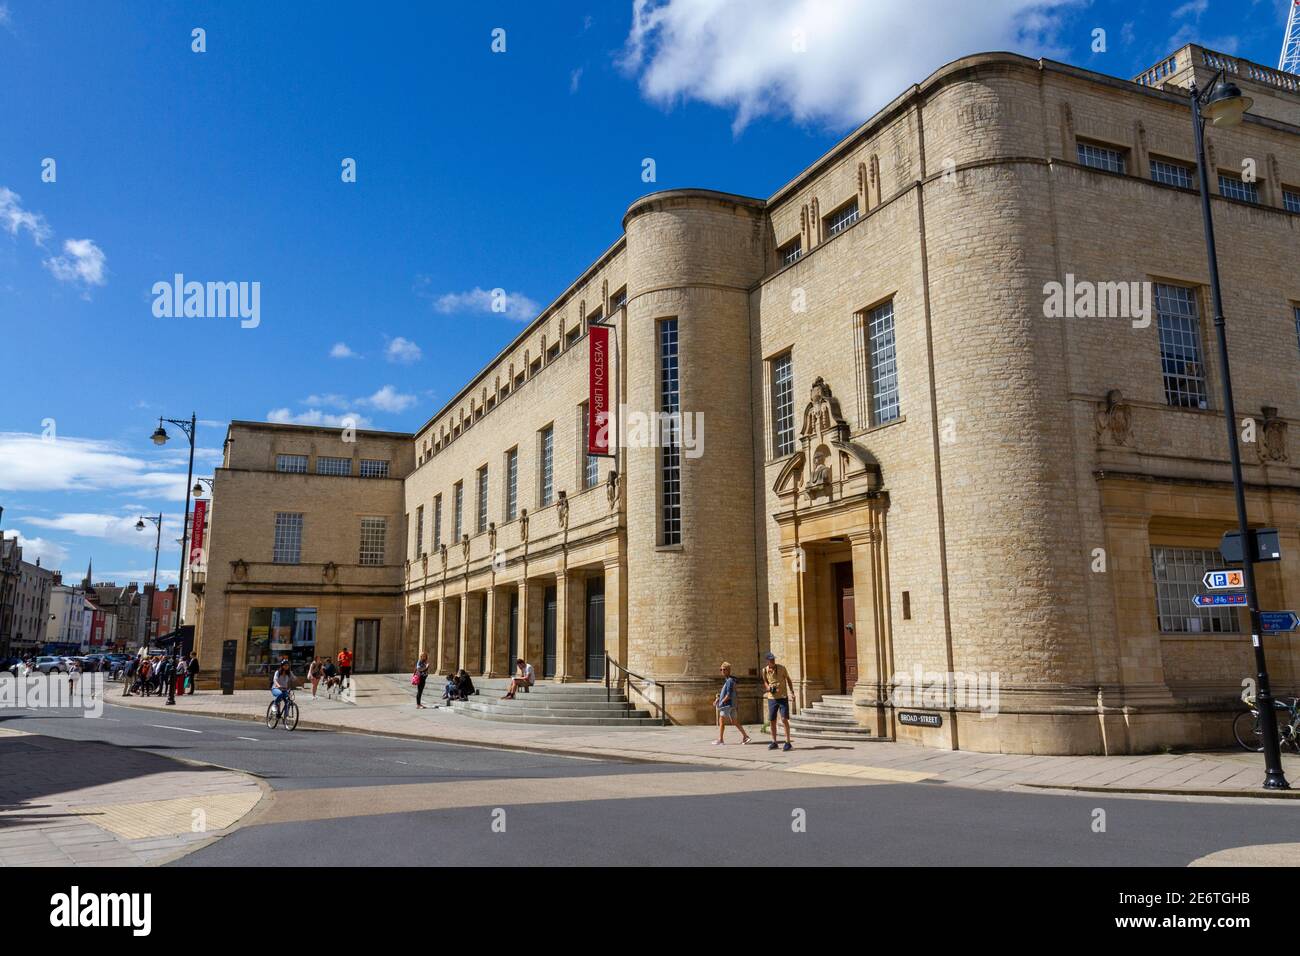 Weston Library, part of the Bodleian Library, the main research library of the University of Oxford, Broad Street, Oxford, Oxfordshire, UK. Stock Photo